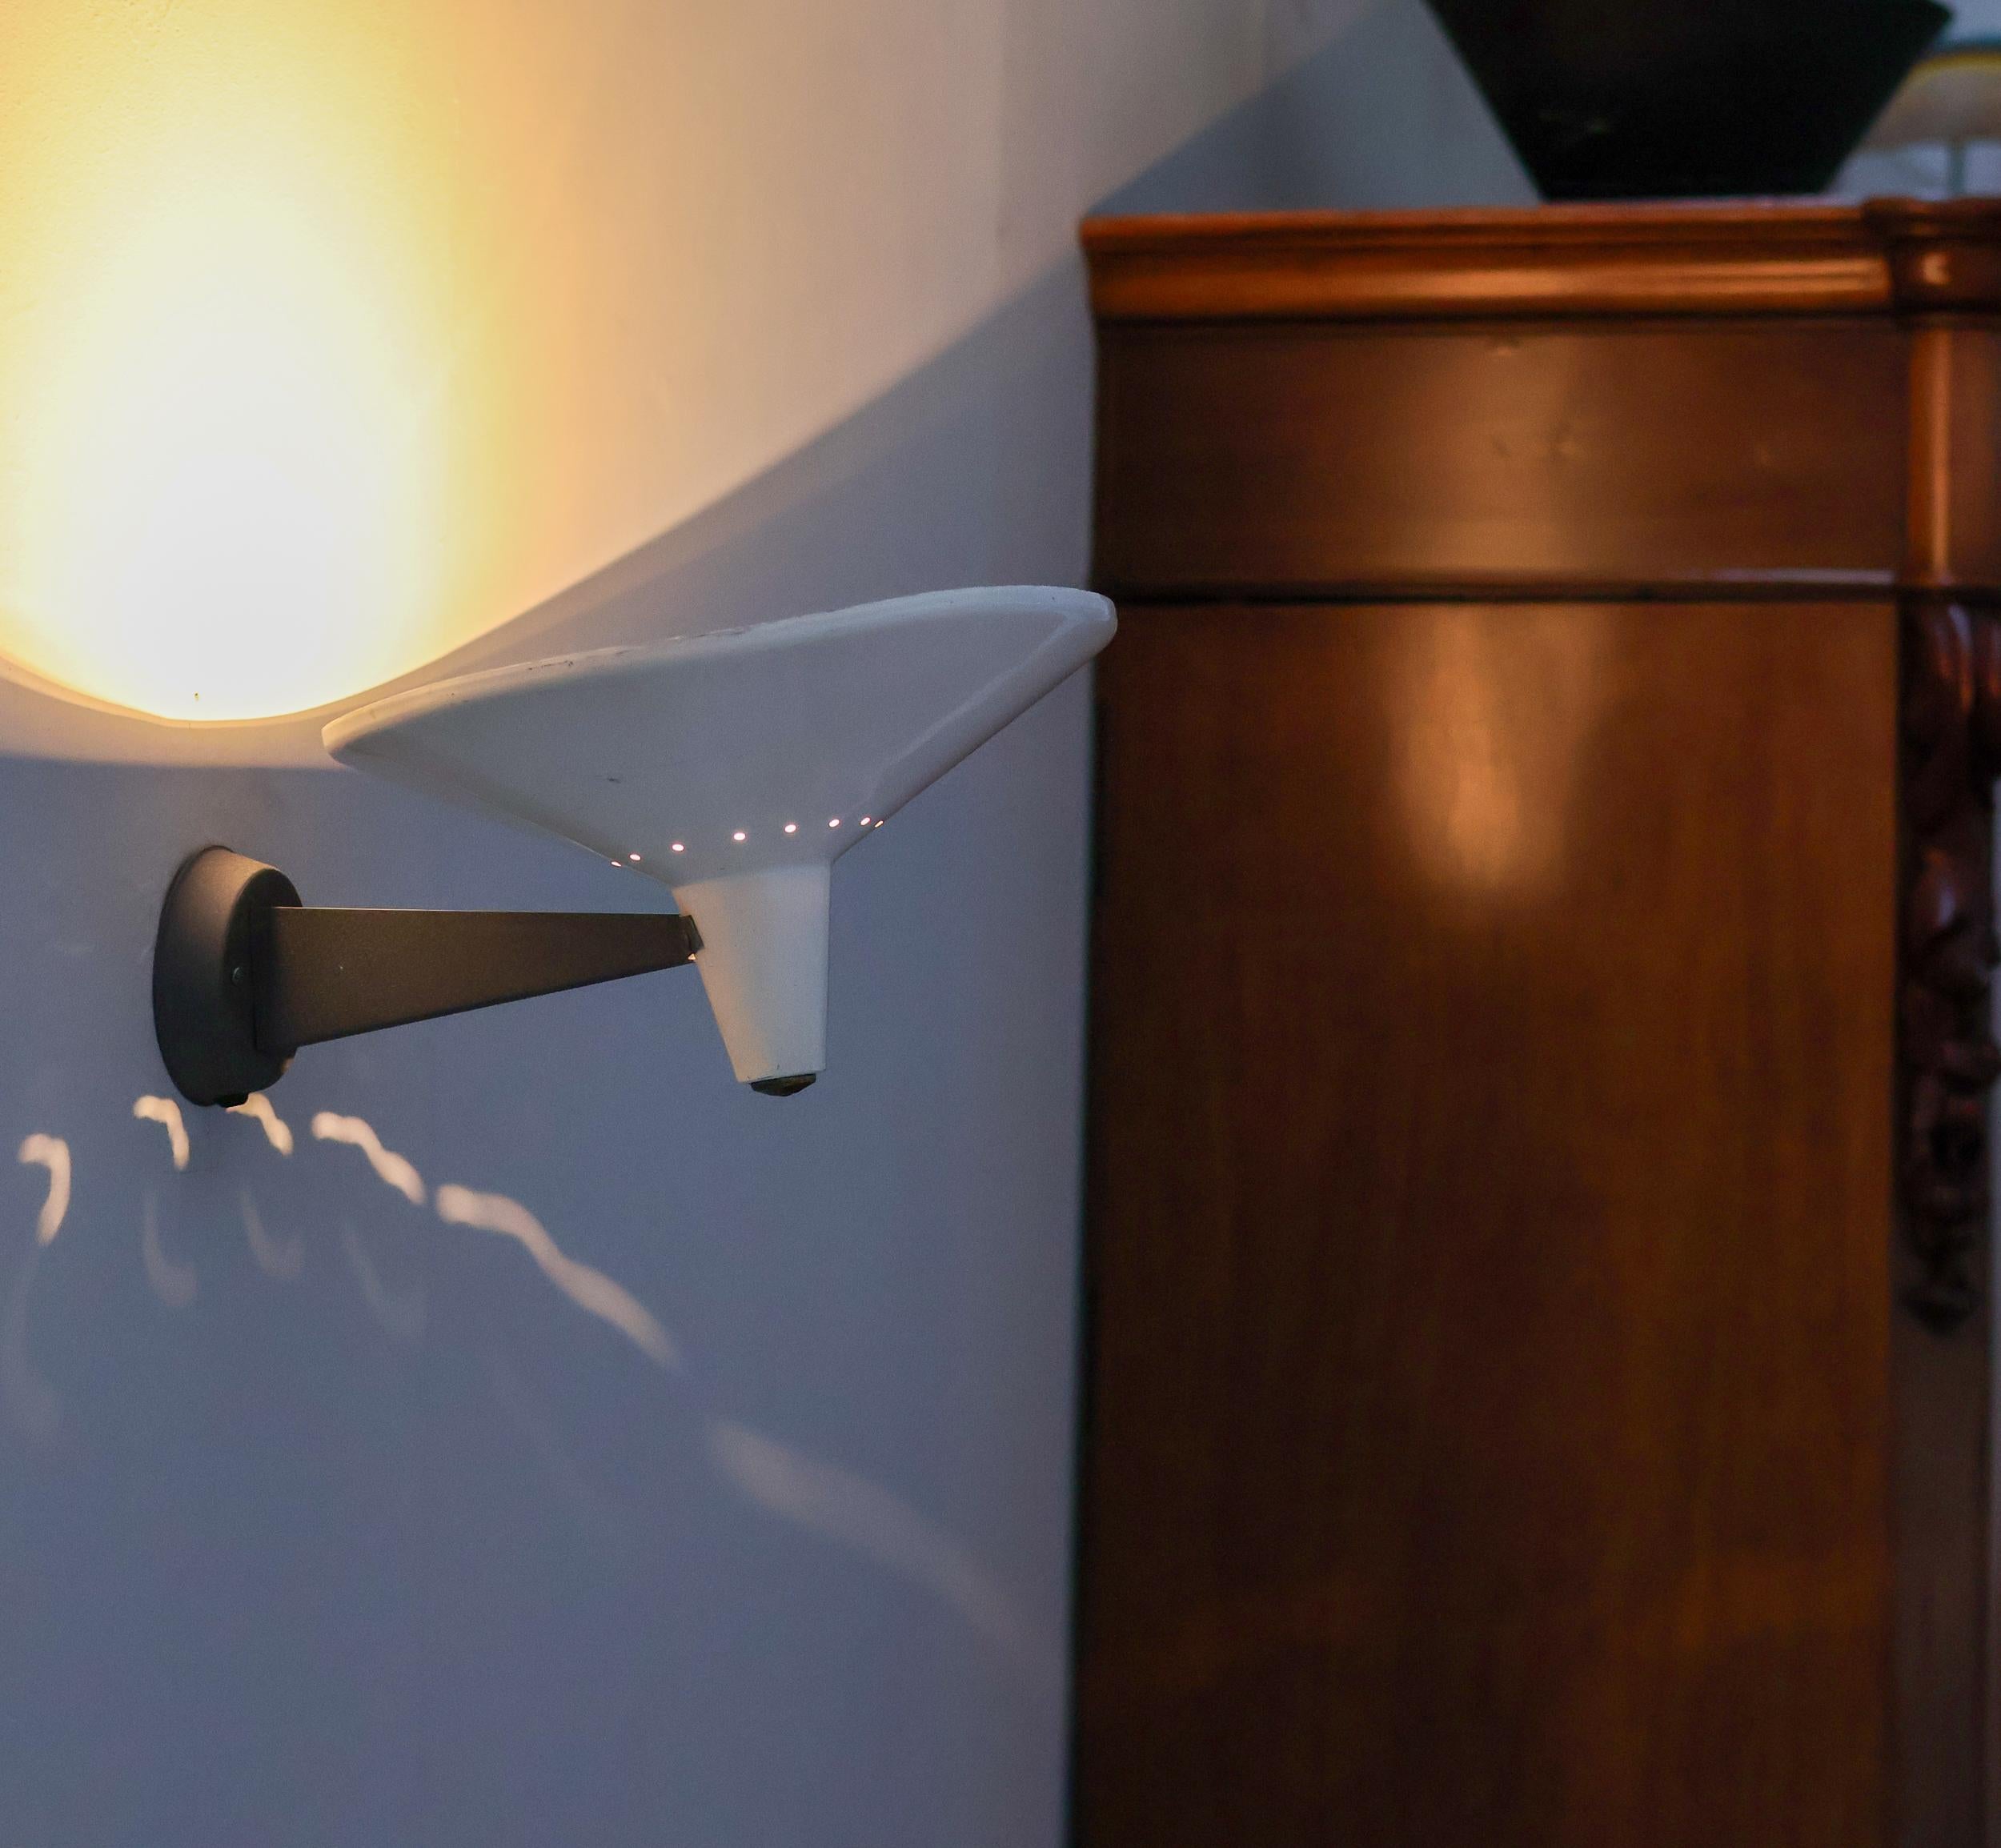 Mid-20th Century Modern wall sconce, made in Italy.
Made in enameled steel, the shade can be adjusted slightly to create the right angle to the wall.
Unmarked.